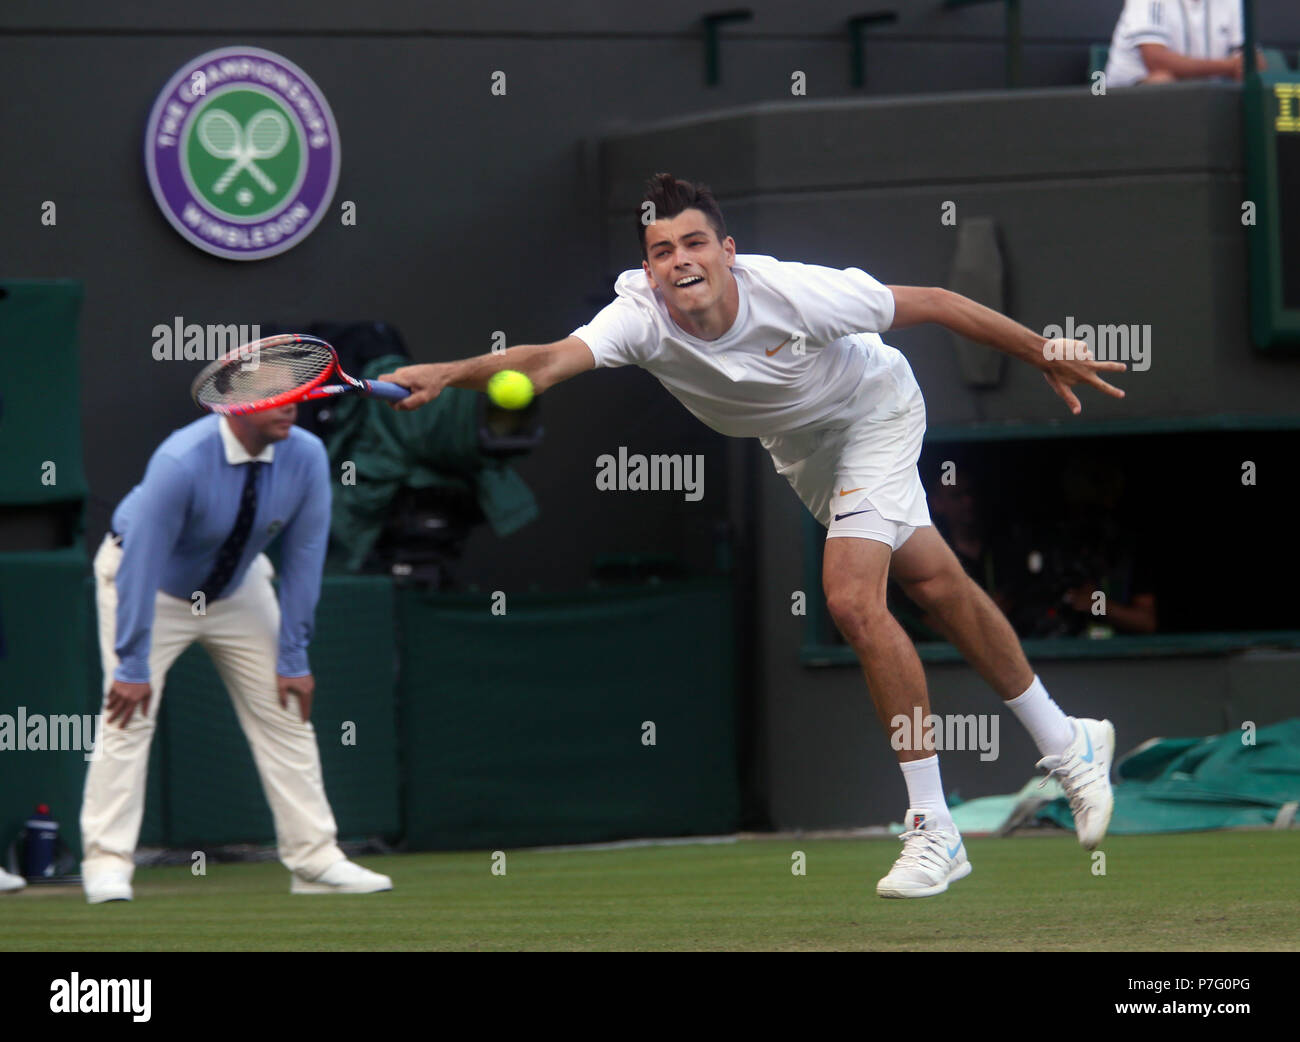 London, UK. 05th July, 2018. London, England - July 5, 2018. Wimbledon Tennis: American Taylor Frtiz in action against Number 4 seed Alexander Zverev, of Germany during their second round match at Wimbledon. Credit: Adam Stoltman/Alamy Live News Stock Photo